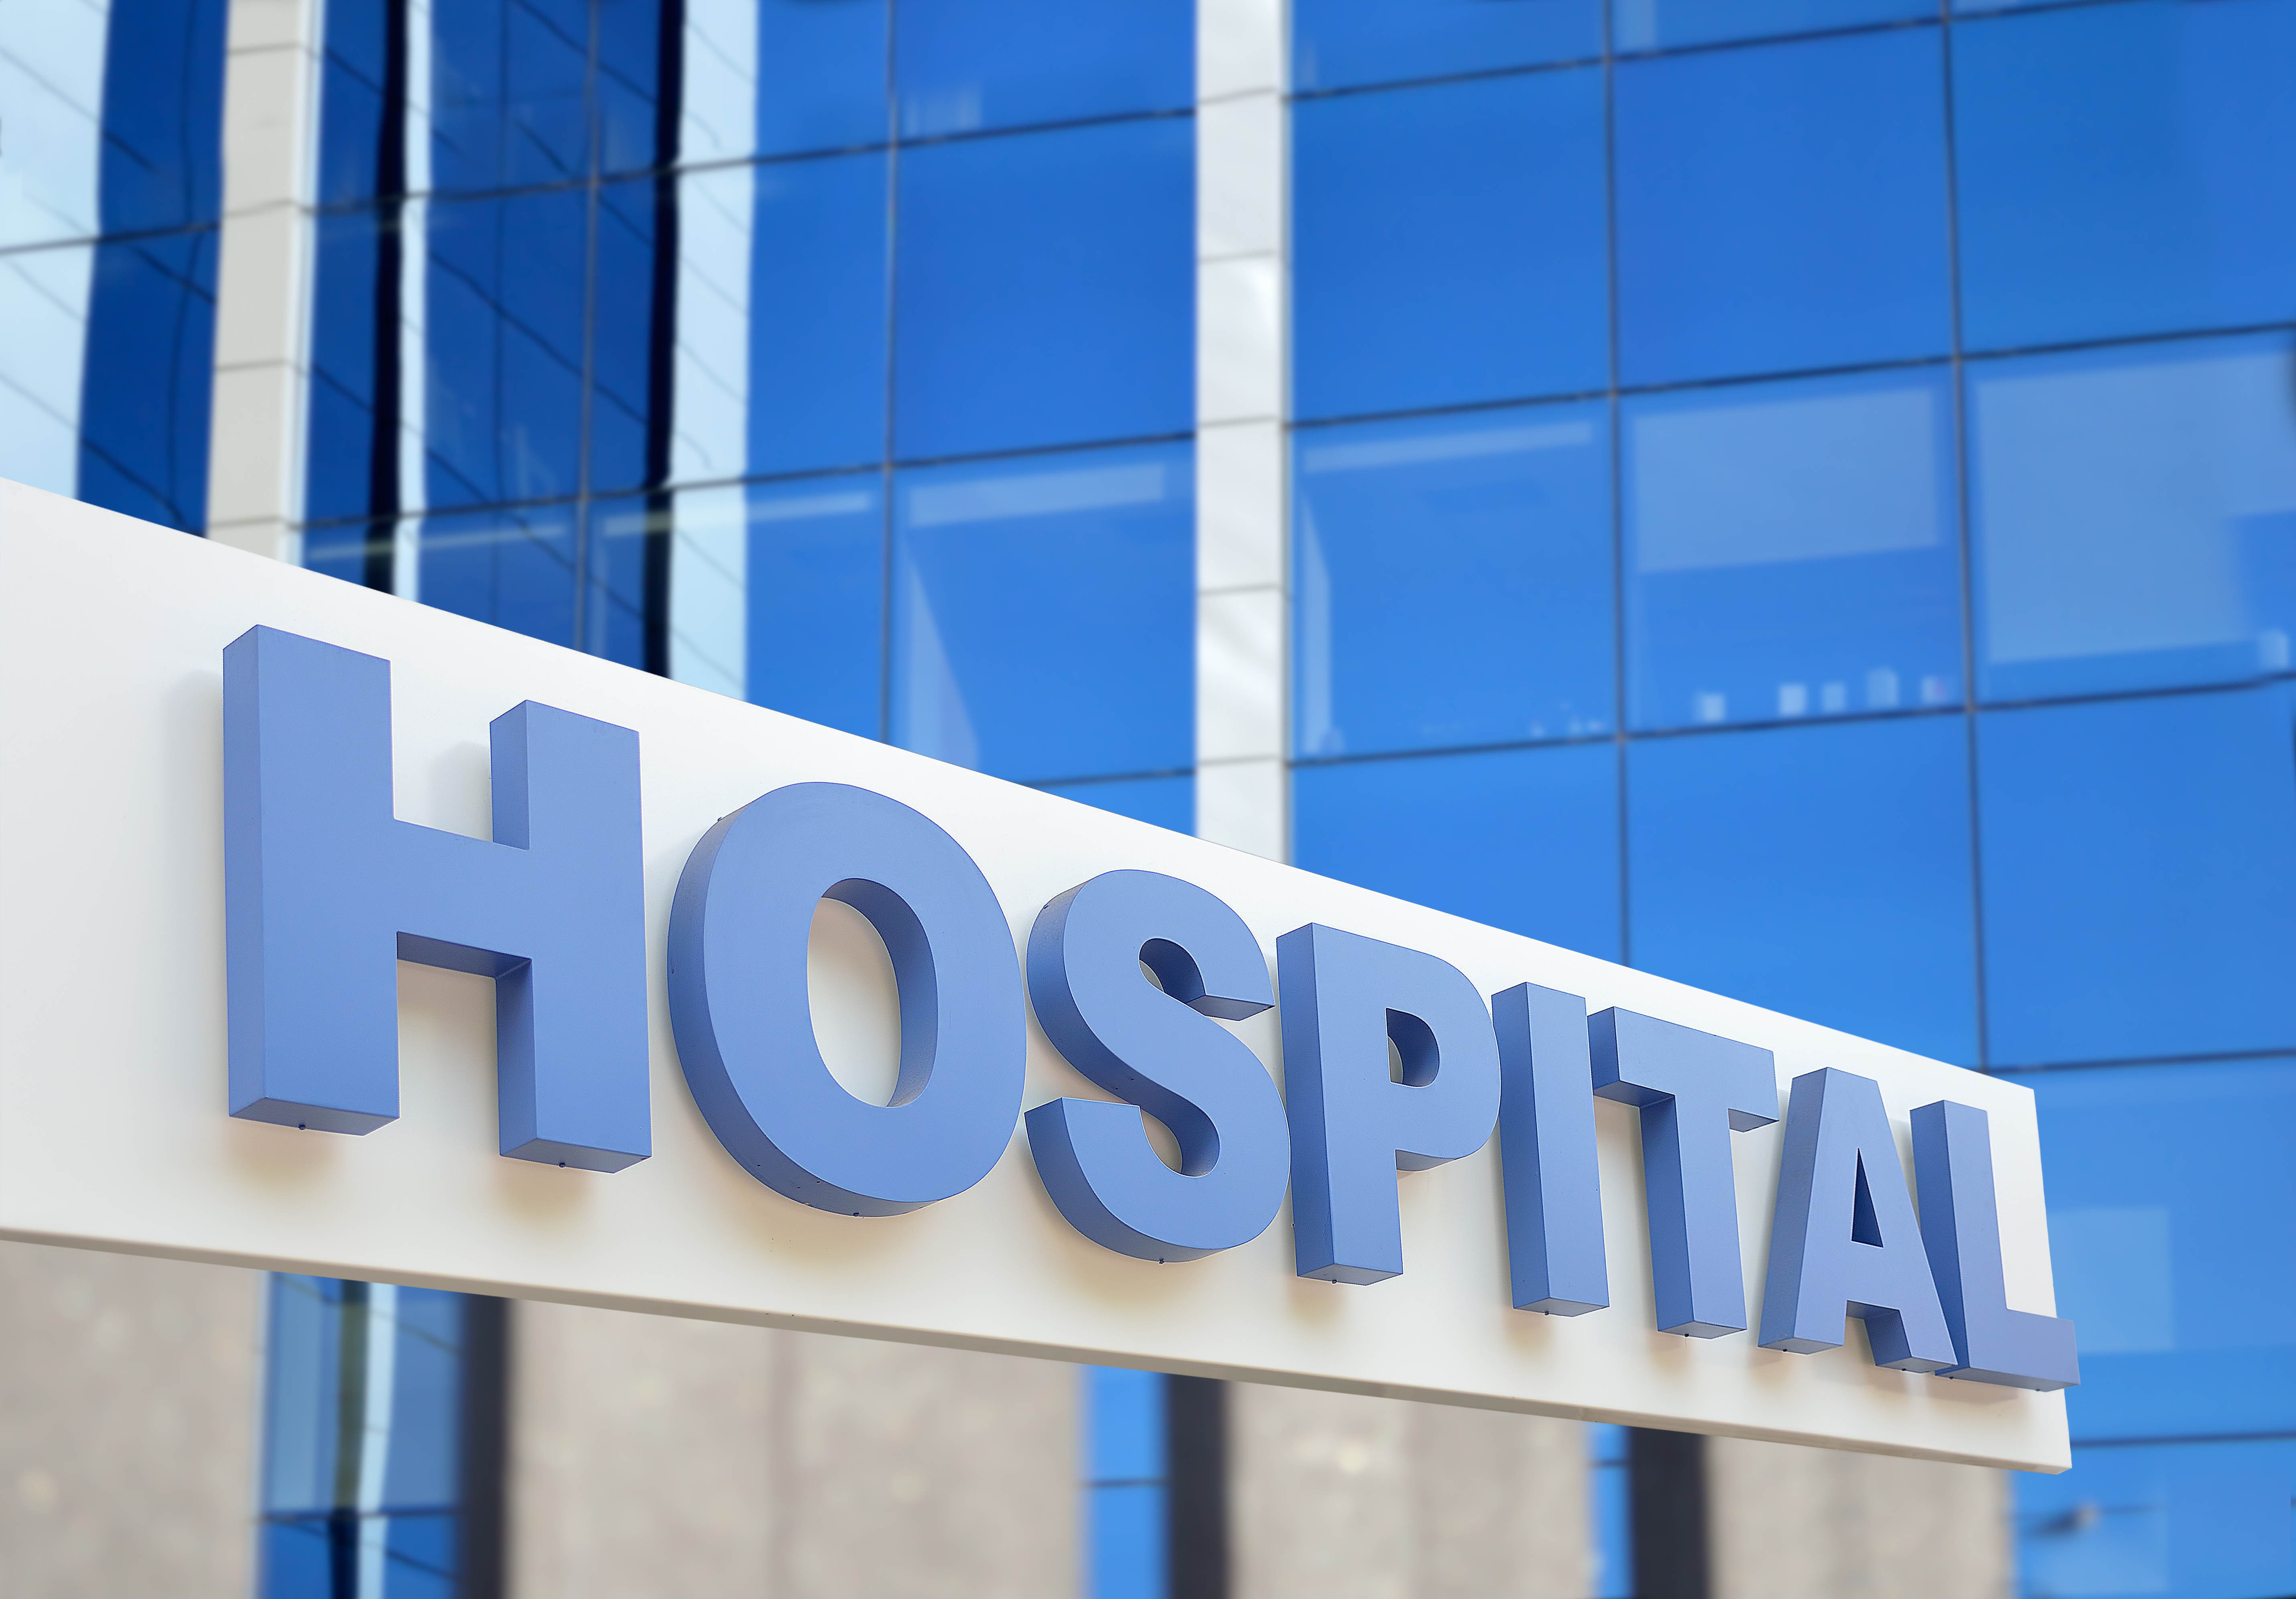 Hospital building sign closeup, with sky reflecting in the glass. | Source: Shutterstock